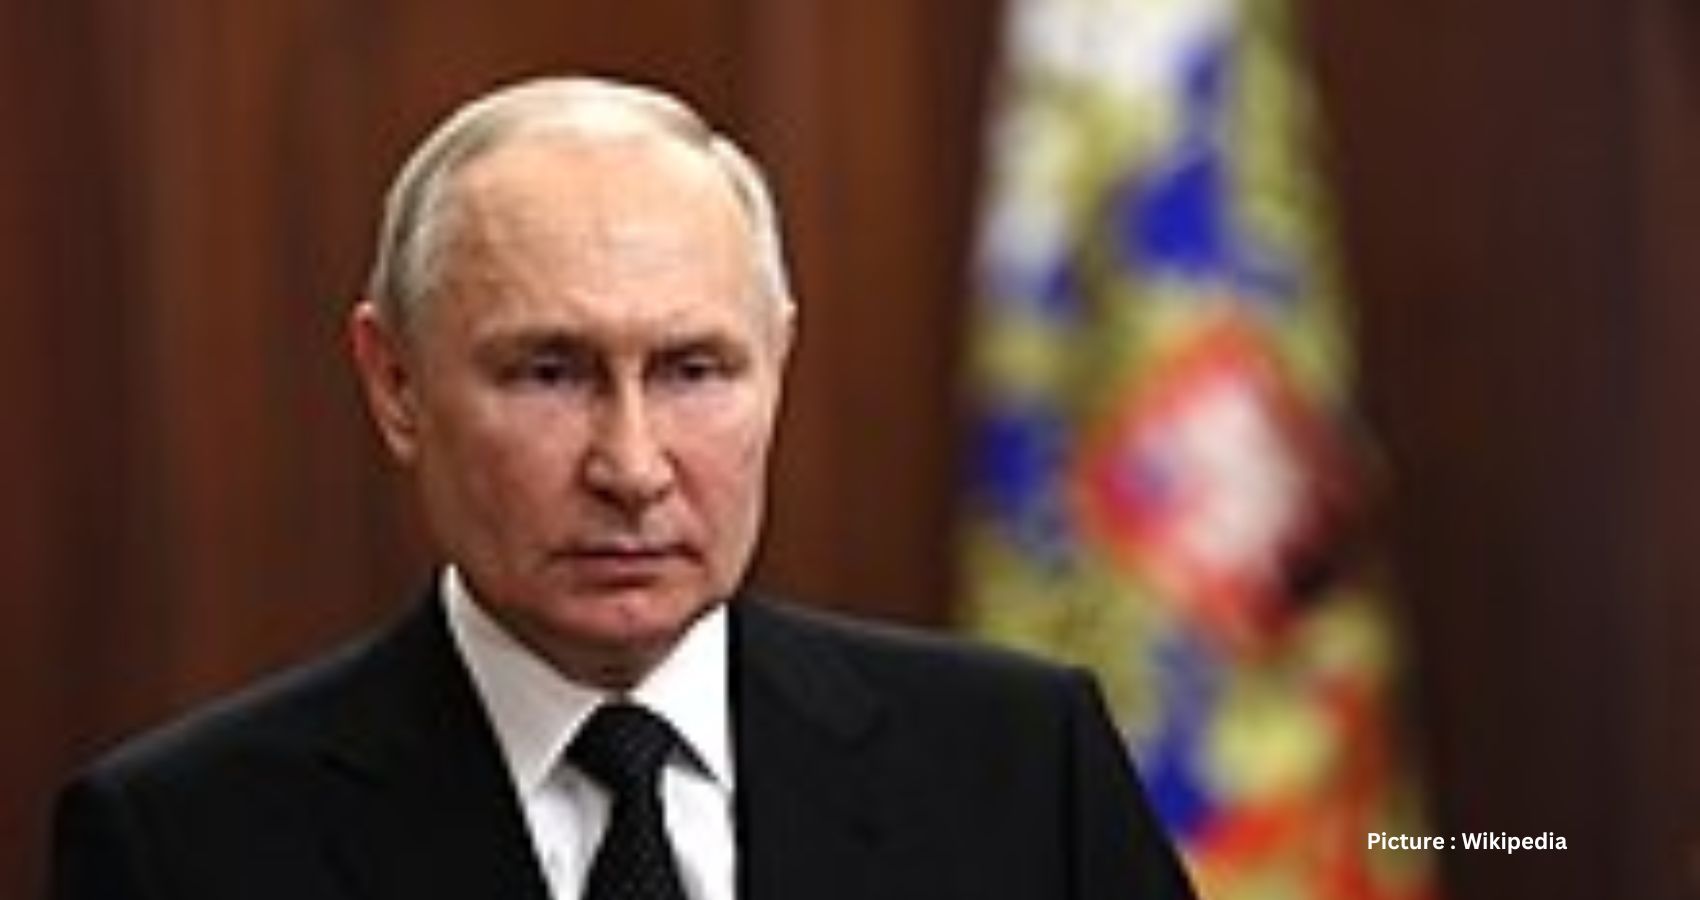 Putin’s Fifth Term: Kremlin Ceremony Marks Renewed Authority Amidst Escalating Tensions with the West